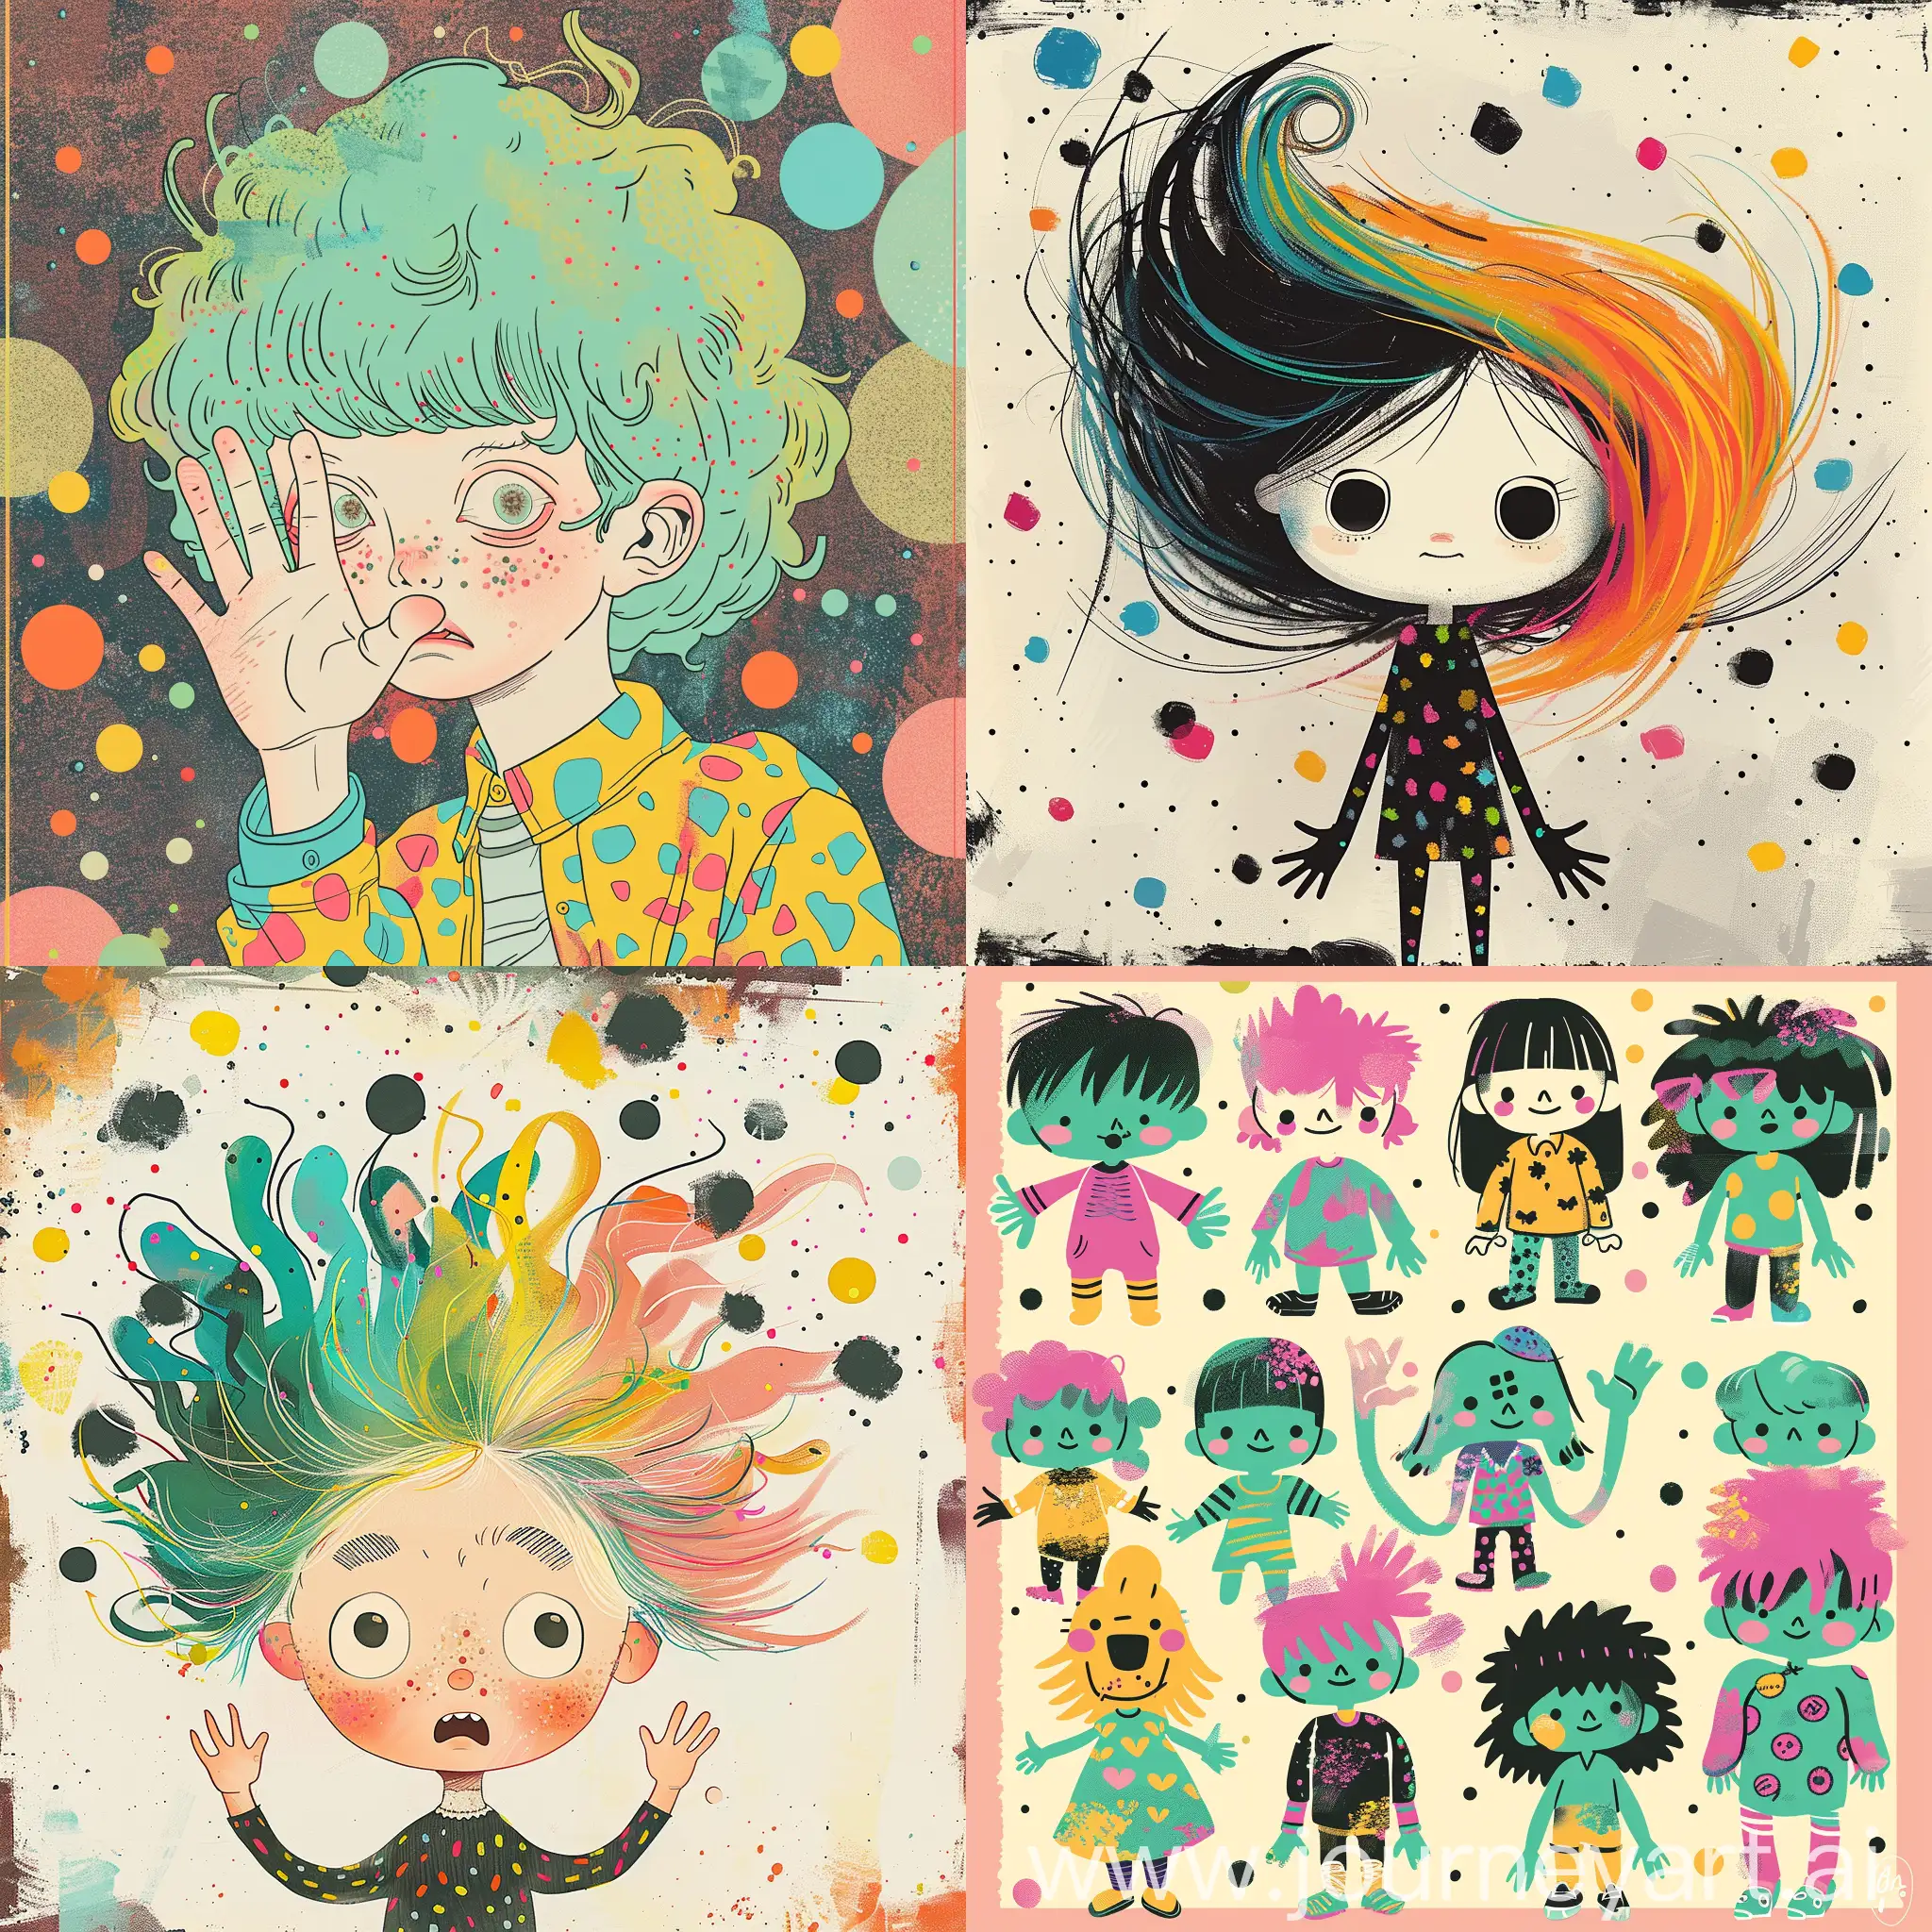 Korean illustration style, colorful big haired children cartoon styled as pastel goth, Bonnie Zacher, dark and gritty, Rick directing, playful character design, Agfa Clark, bold color spots, hand gestures